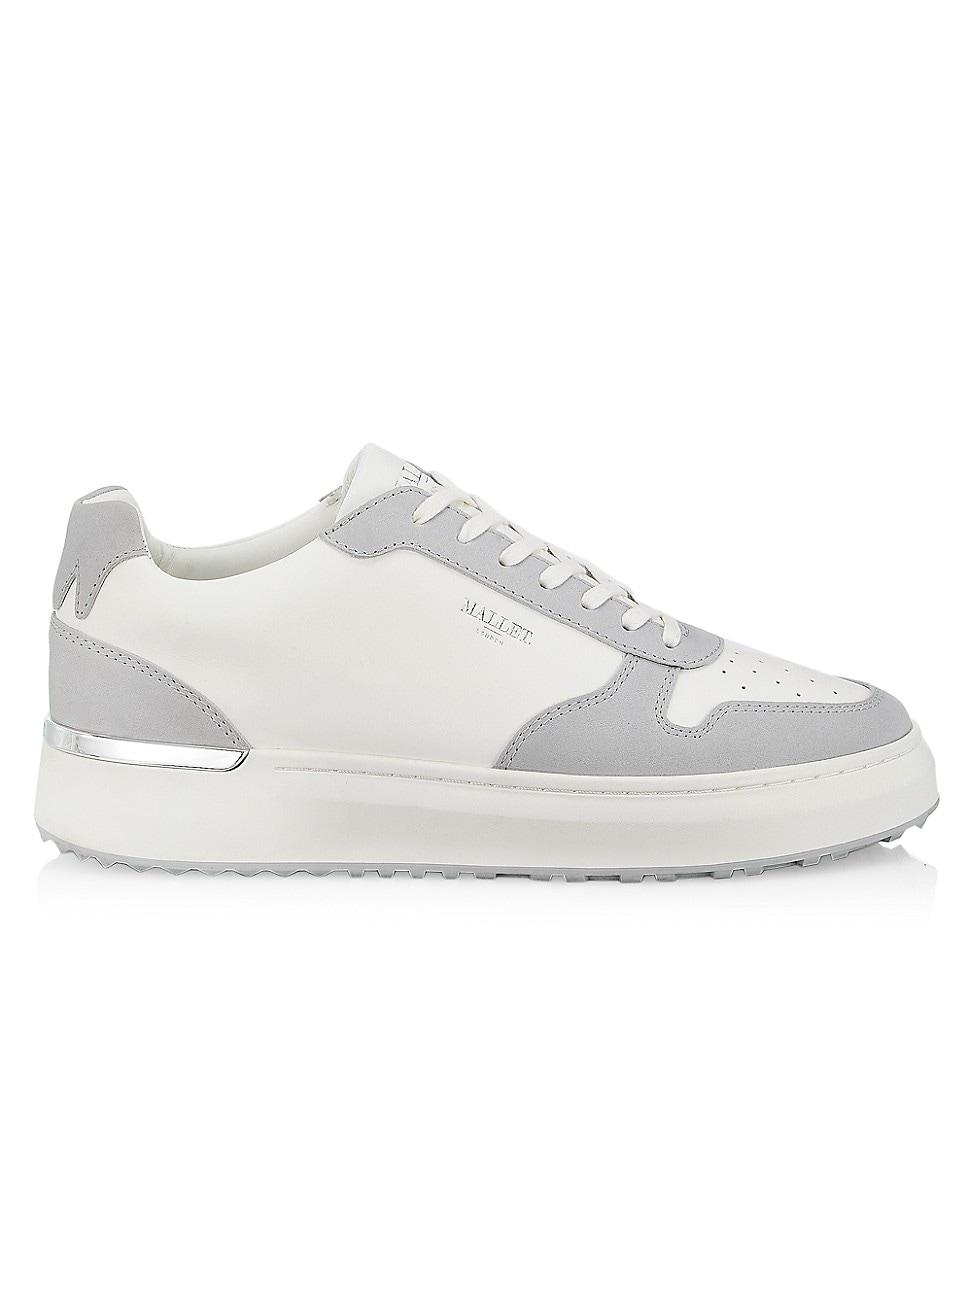 Mallet Hoxton 2.0 Leather Sneakers in White for Men | Lyst